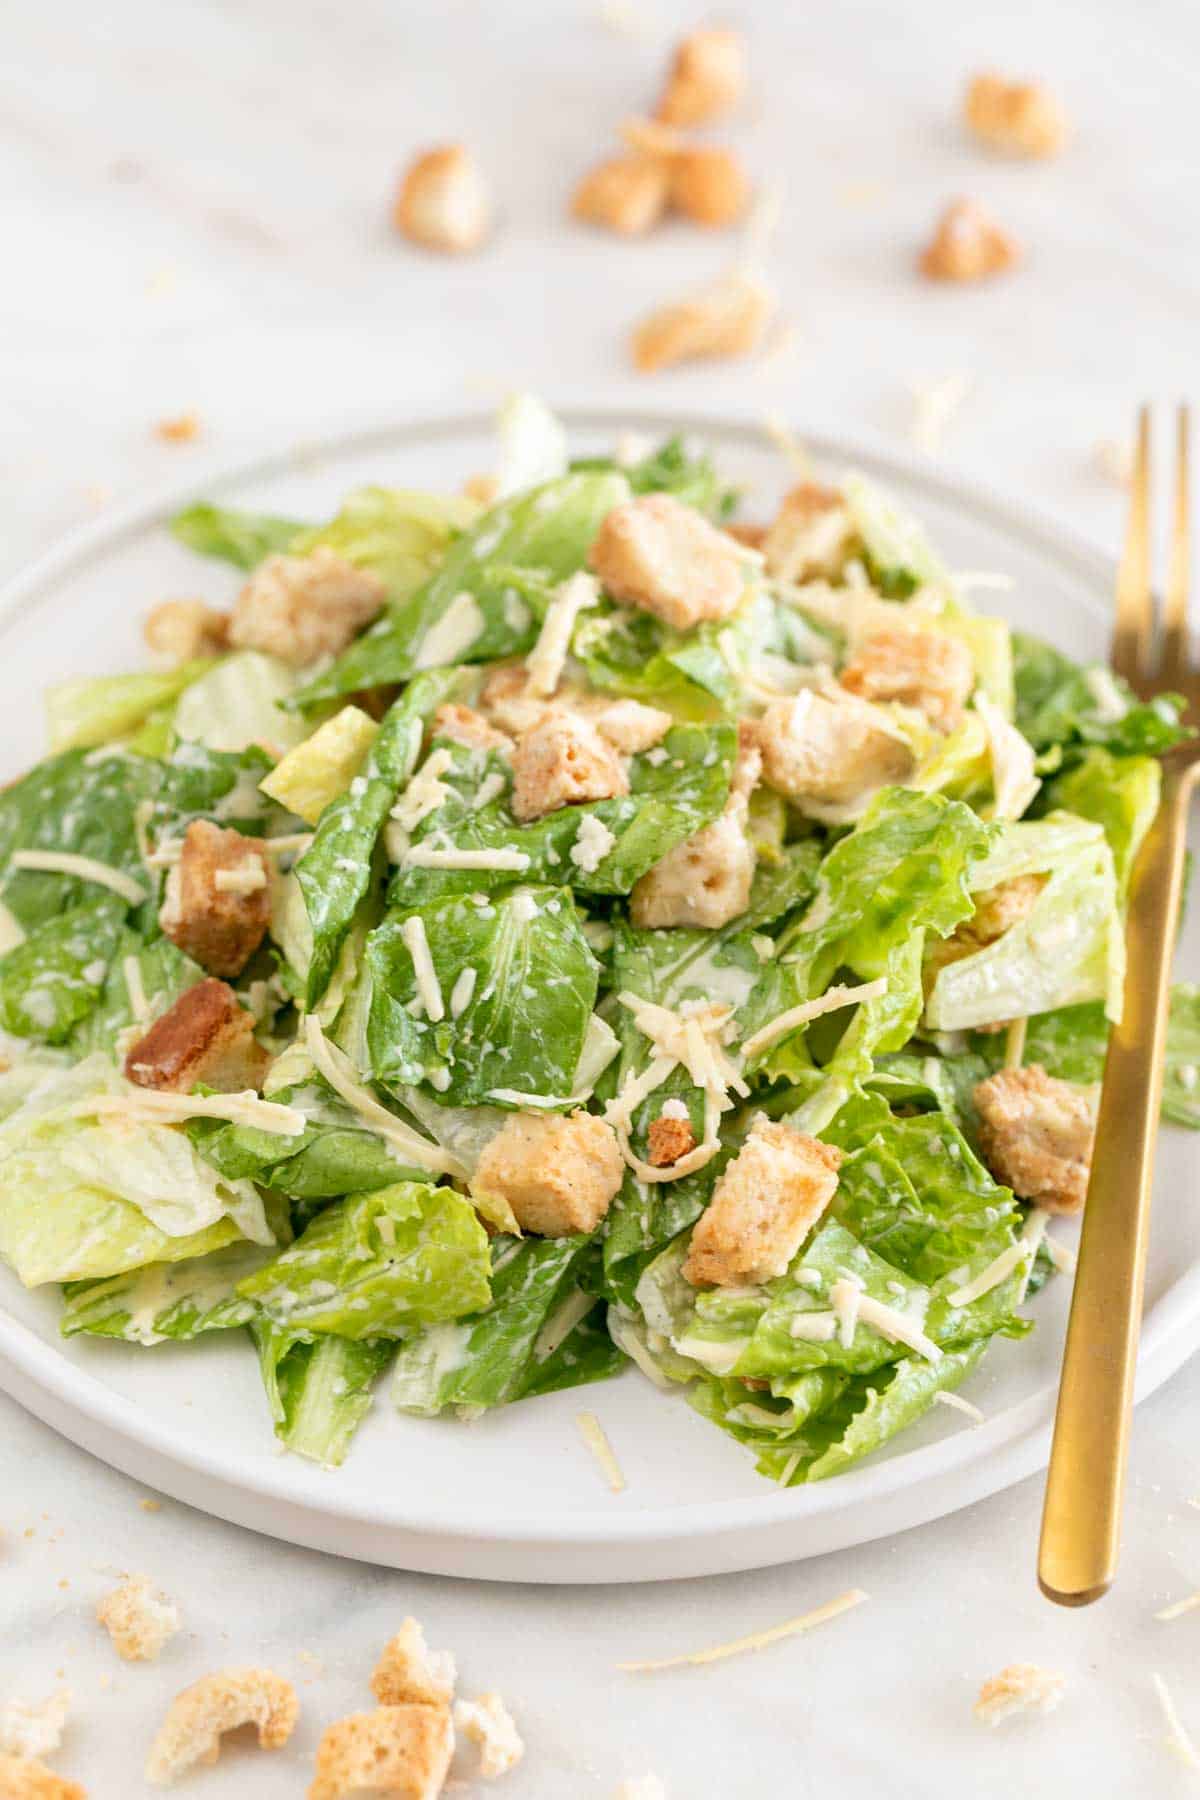 Vegan Caesar salad on a plate with a fork and croutons in the background.